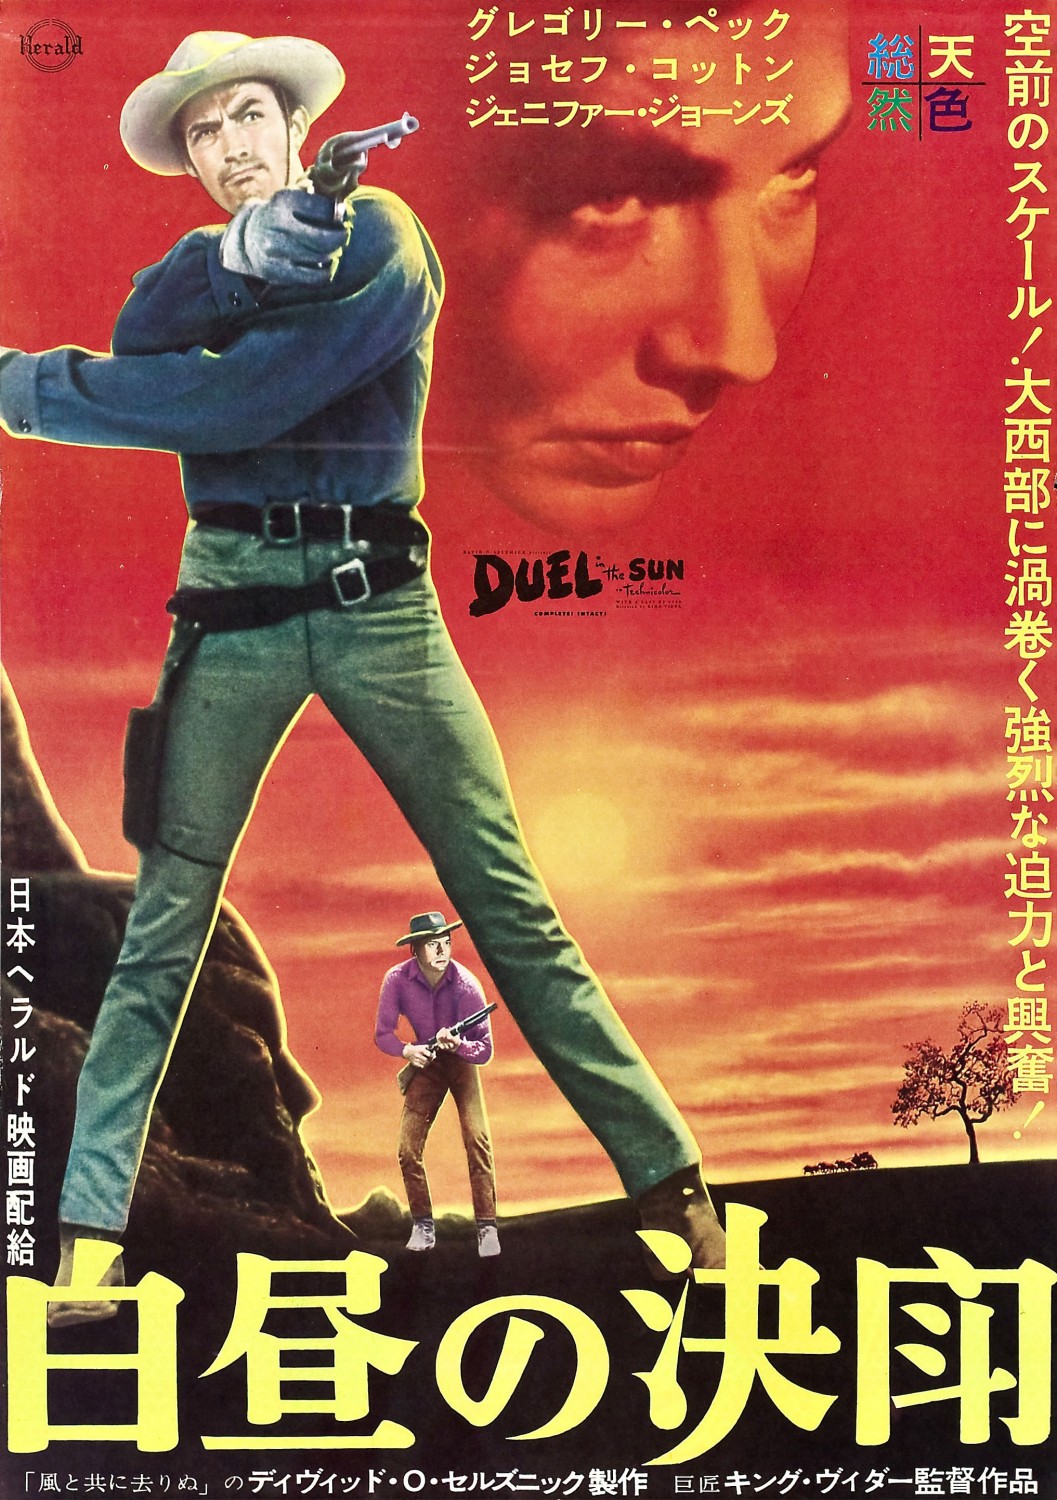 Extra Large Movie Poster Image for Duel in the Sun (#5 of 13)